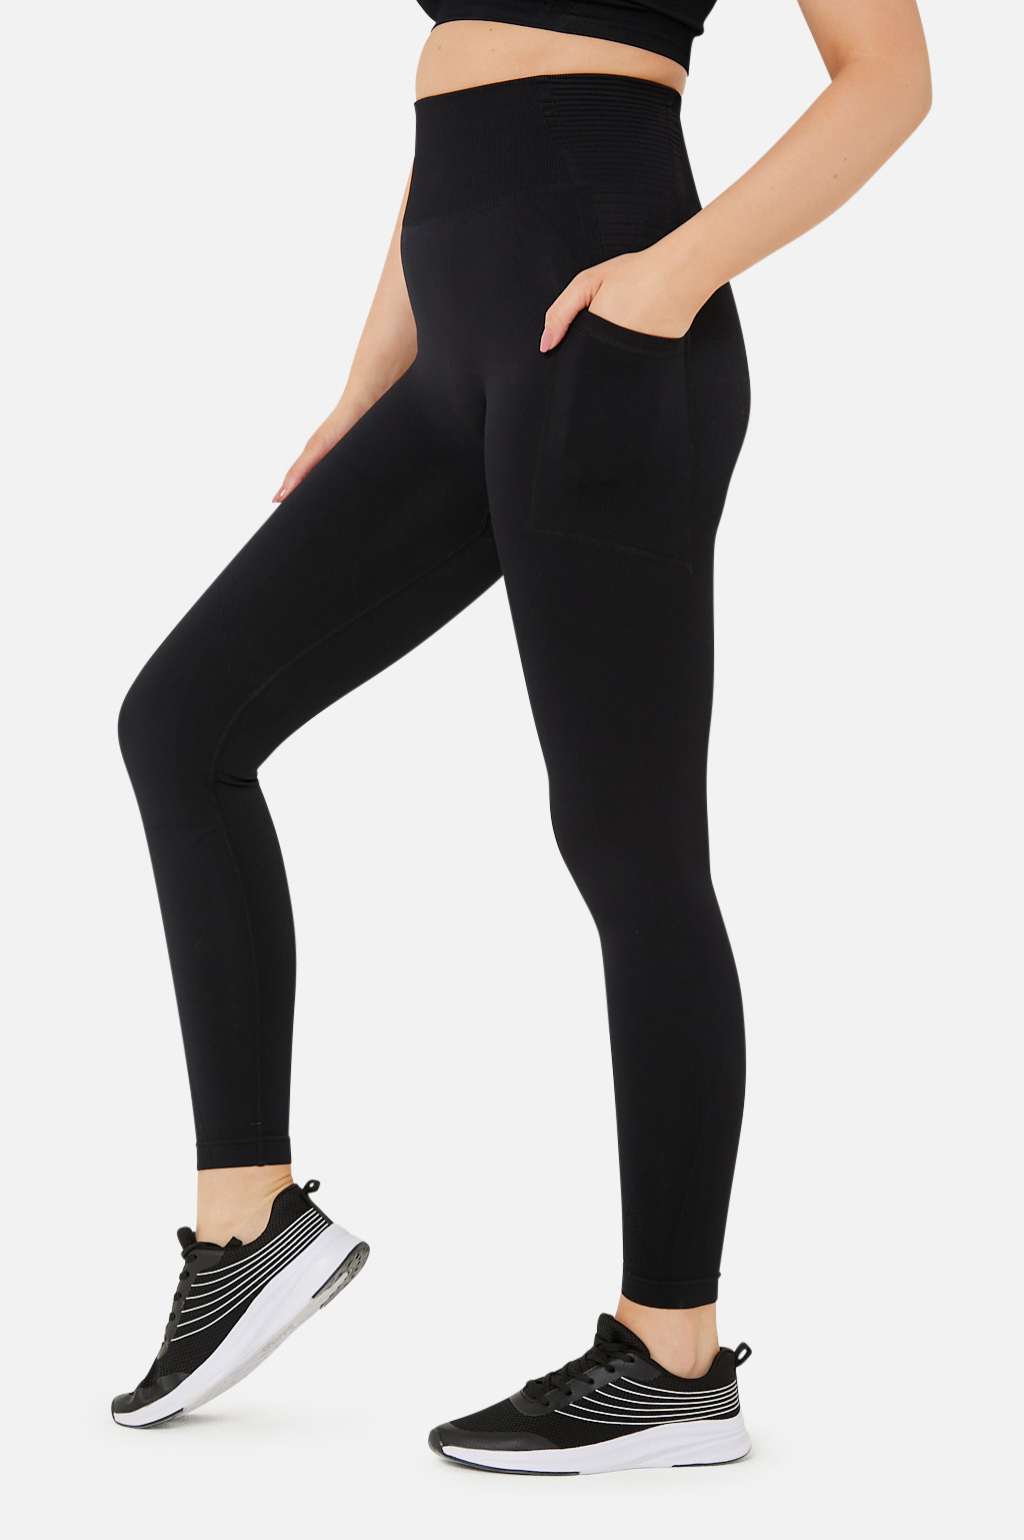 Seamless Compression Leggings V2 with Pocket in Black - Fit Pink Fitness